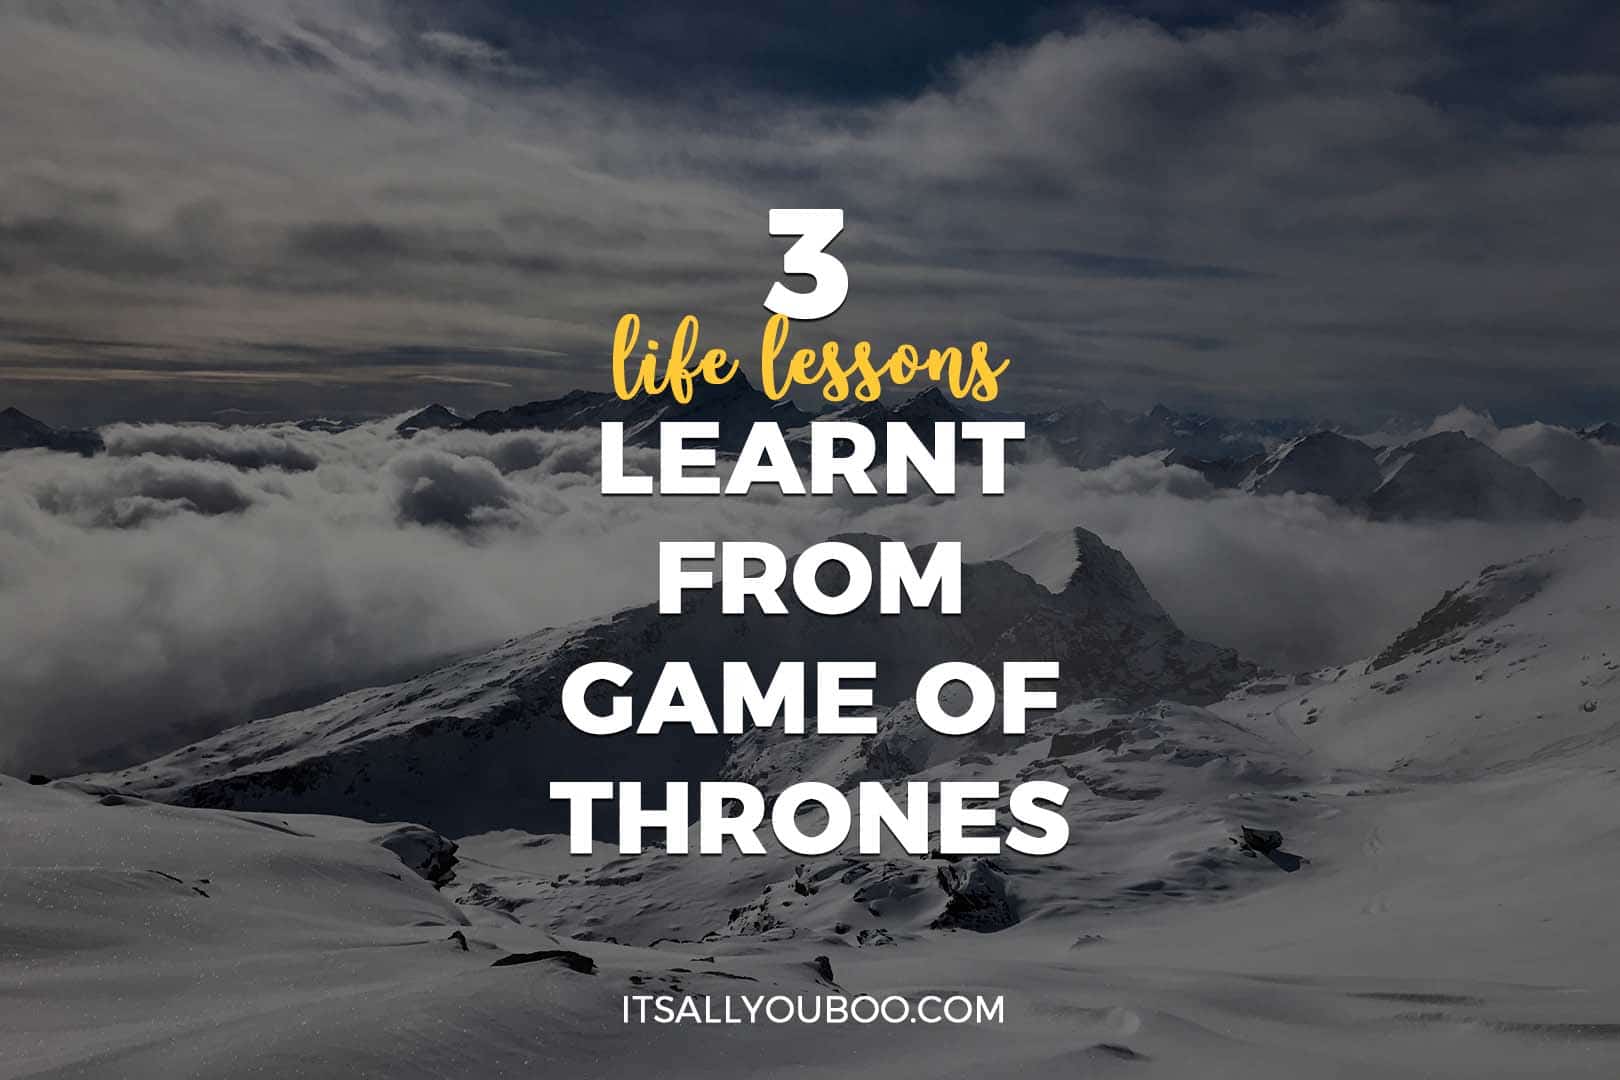 3 Life Lessons Learnt from Game of Thrones